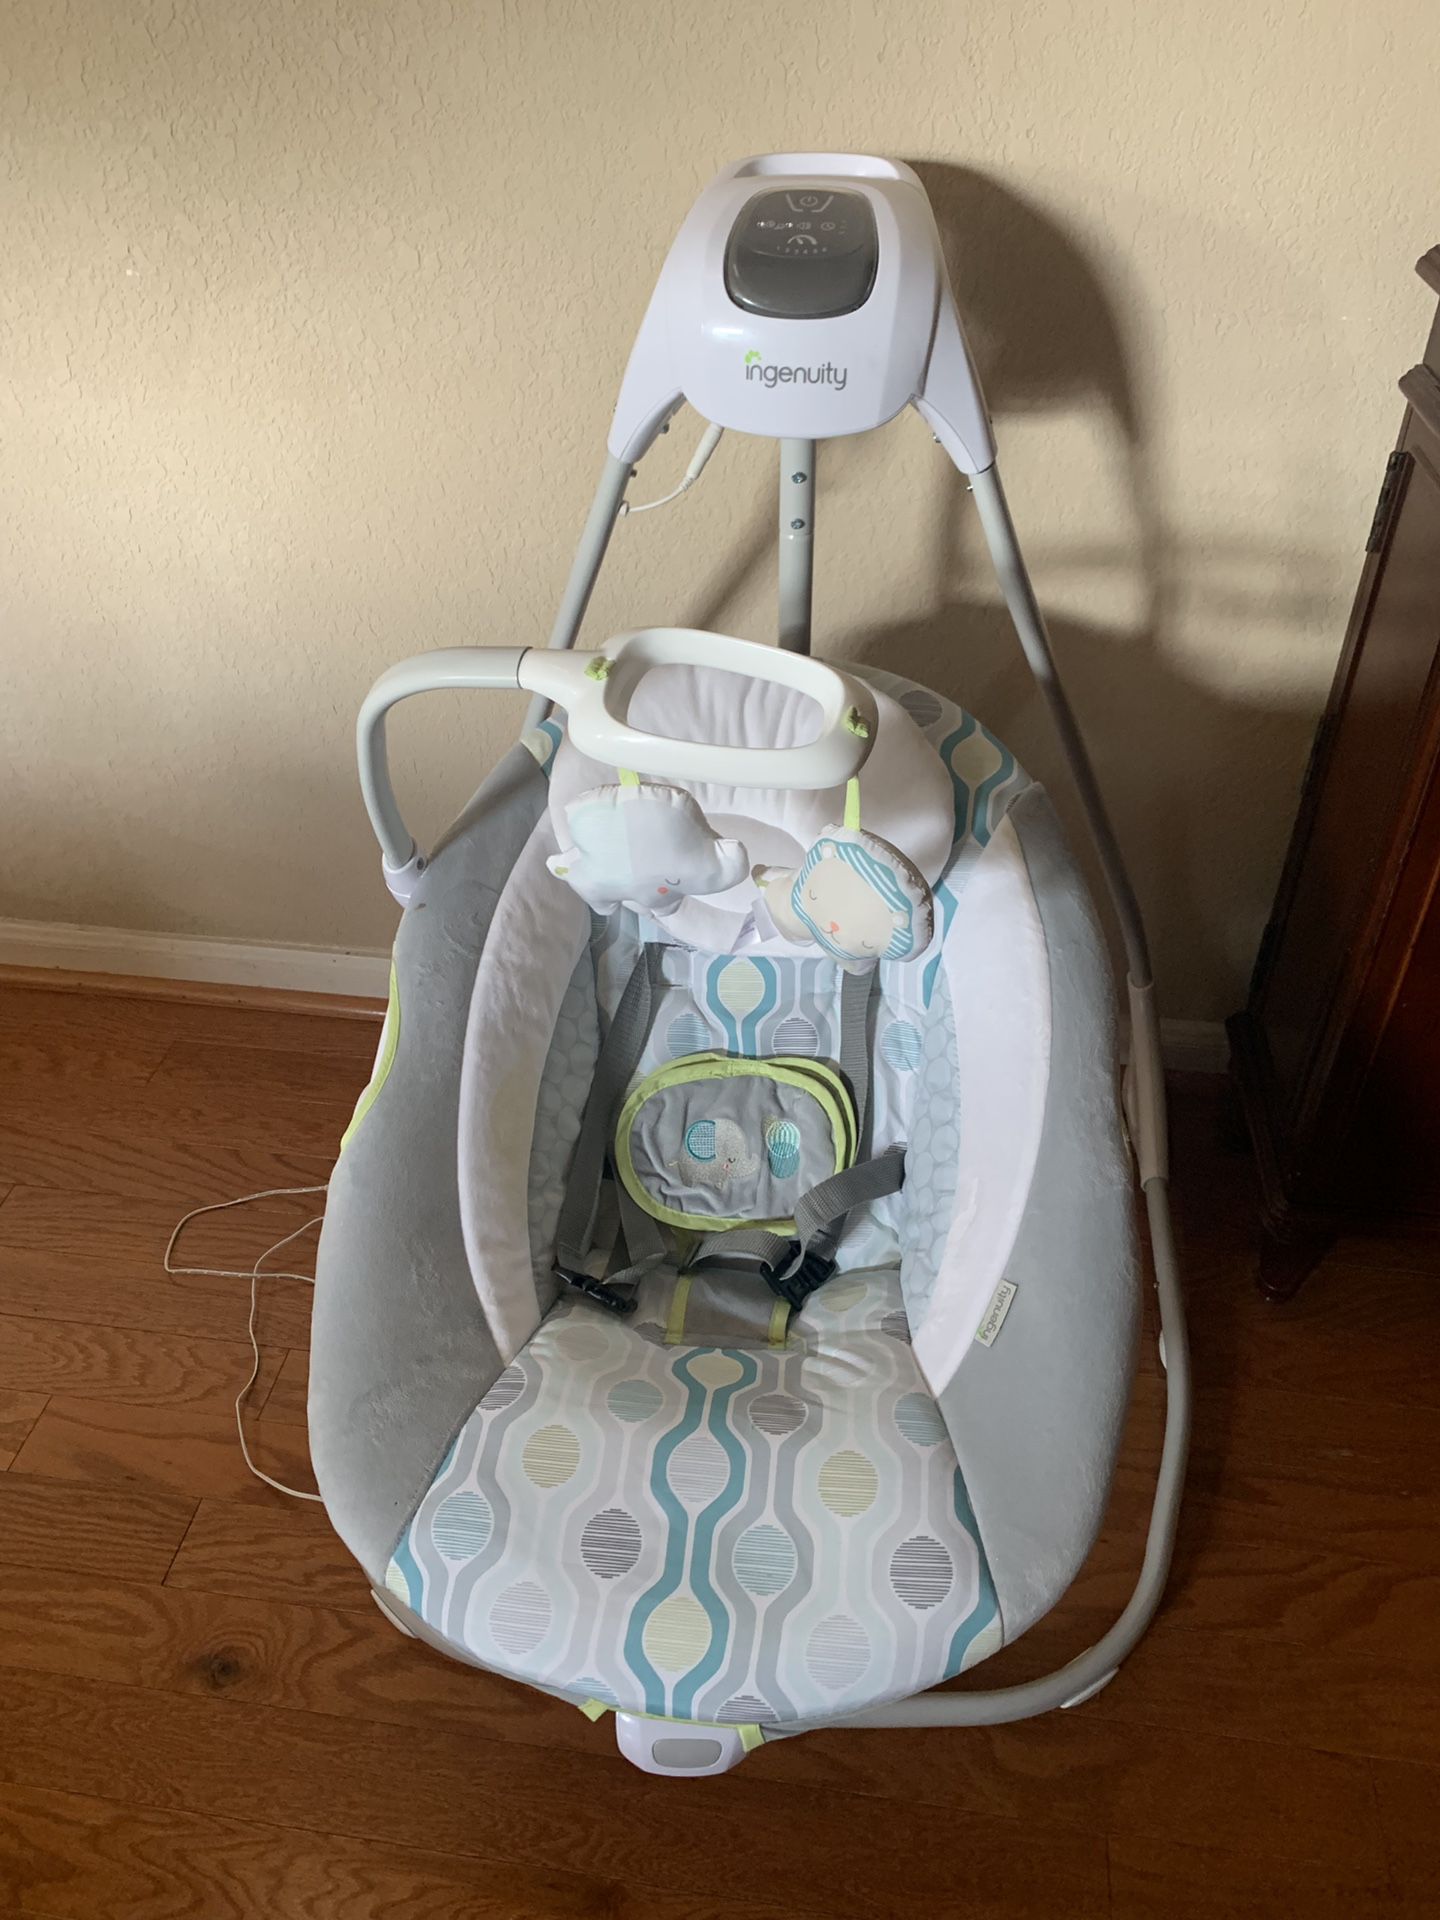 Maxi Cosi car seat with base, baby toys, baby rocker.. must come pick up